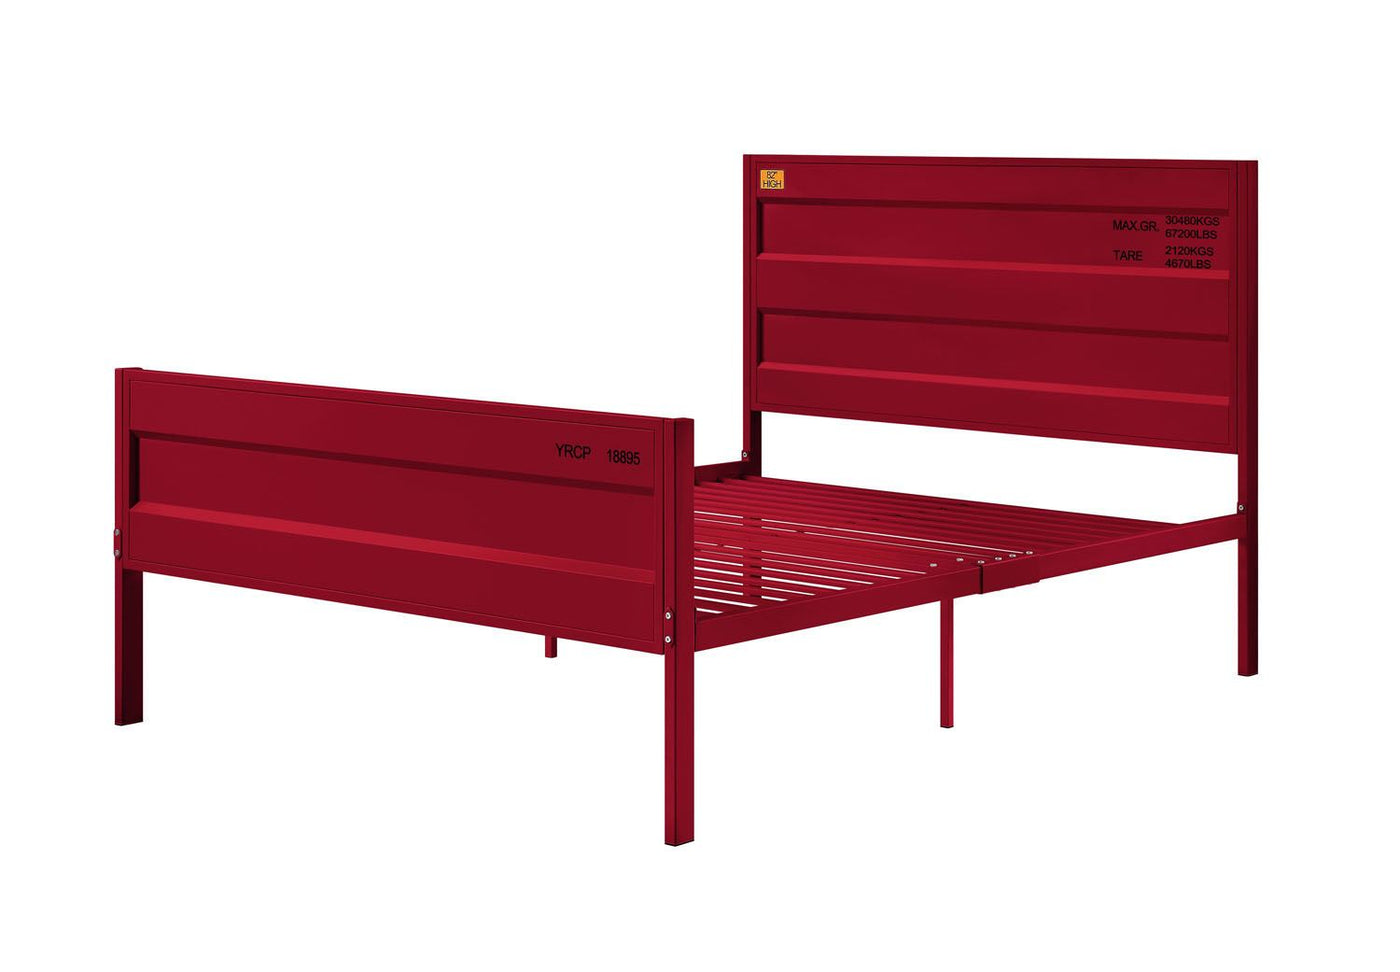 Konto Industrial Full Bed - Red